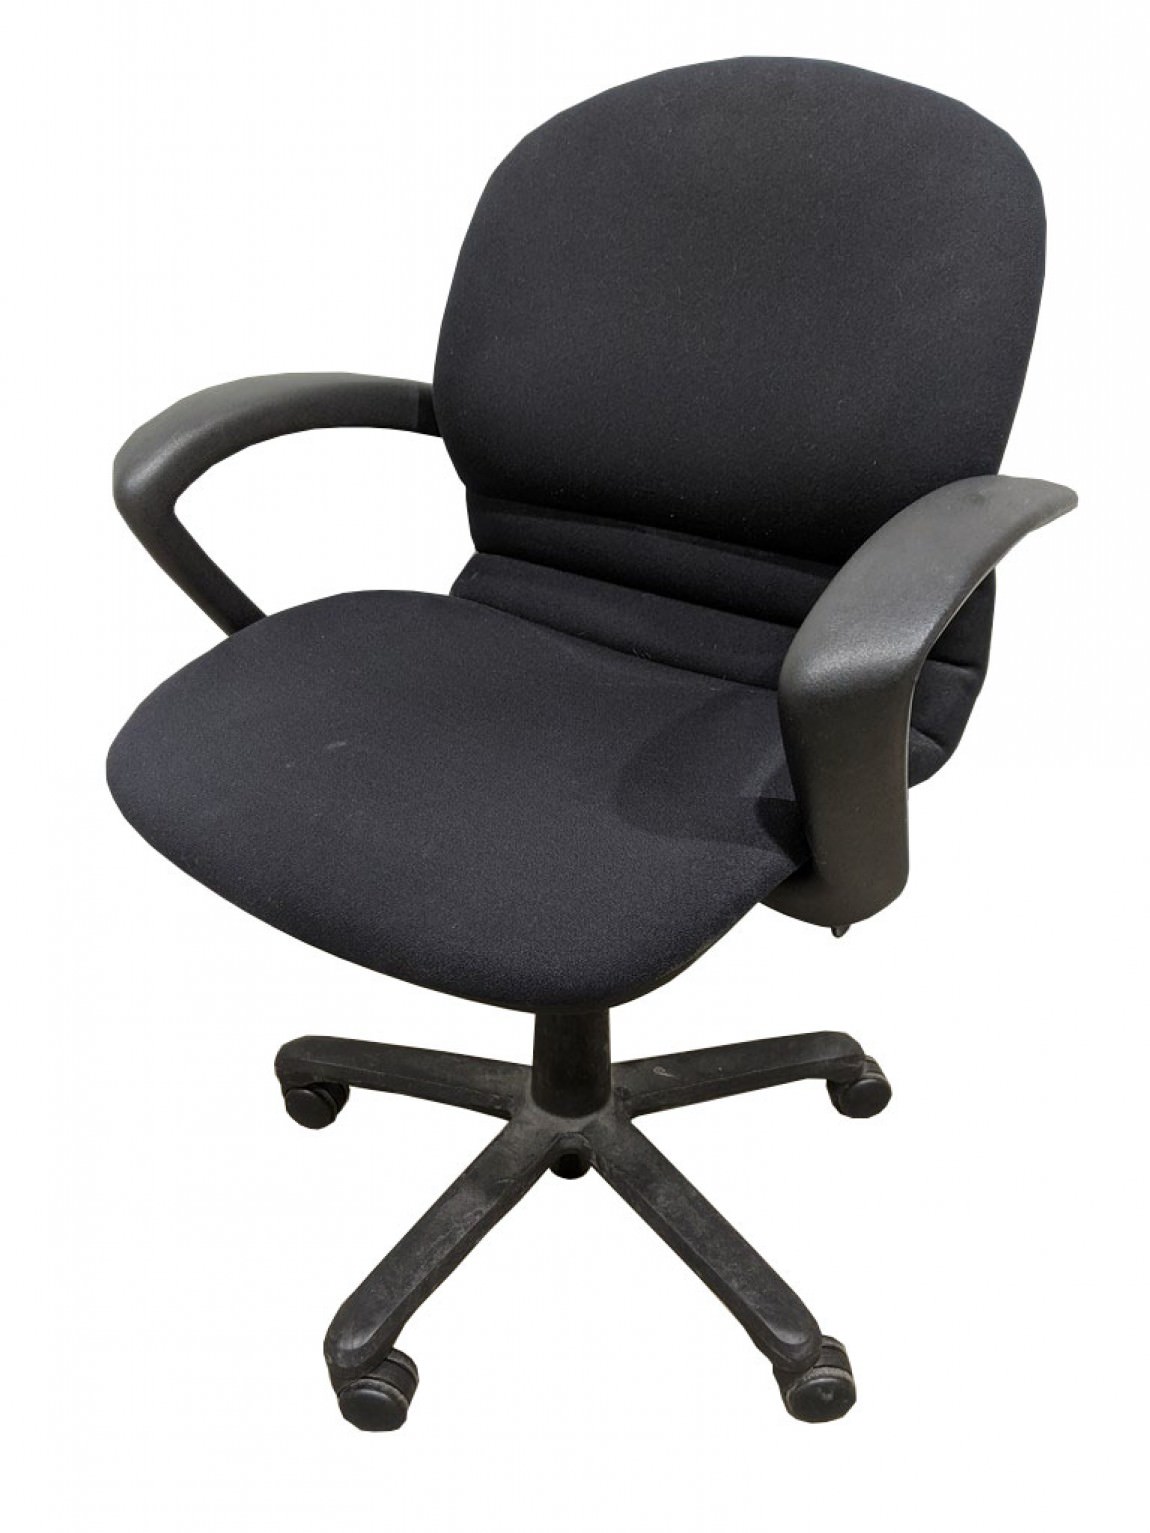 Small Black Rolling Office Chair